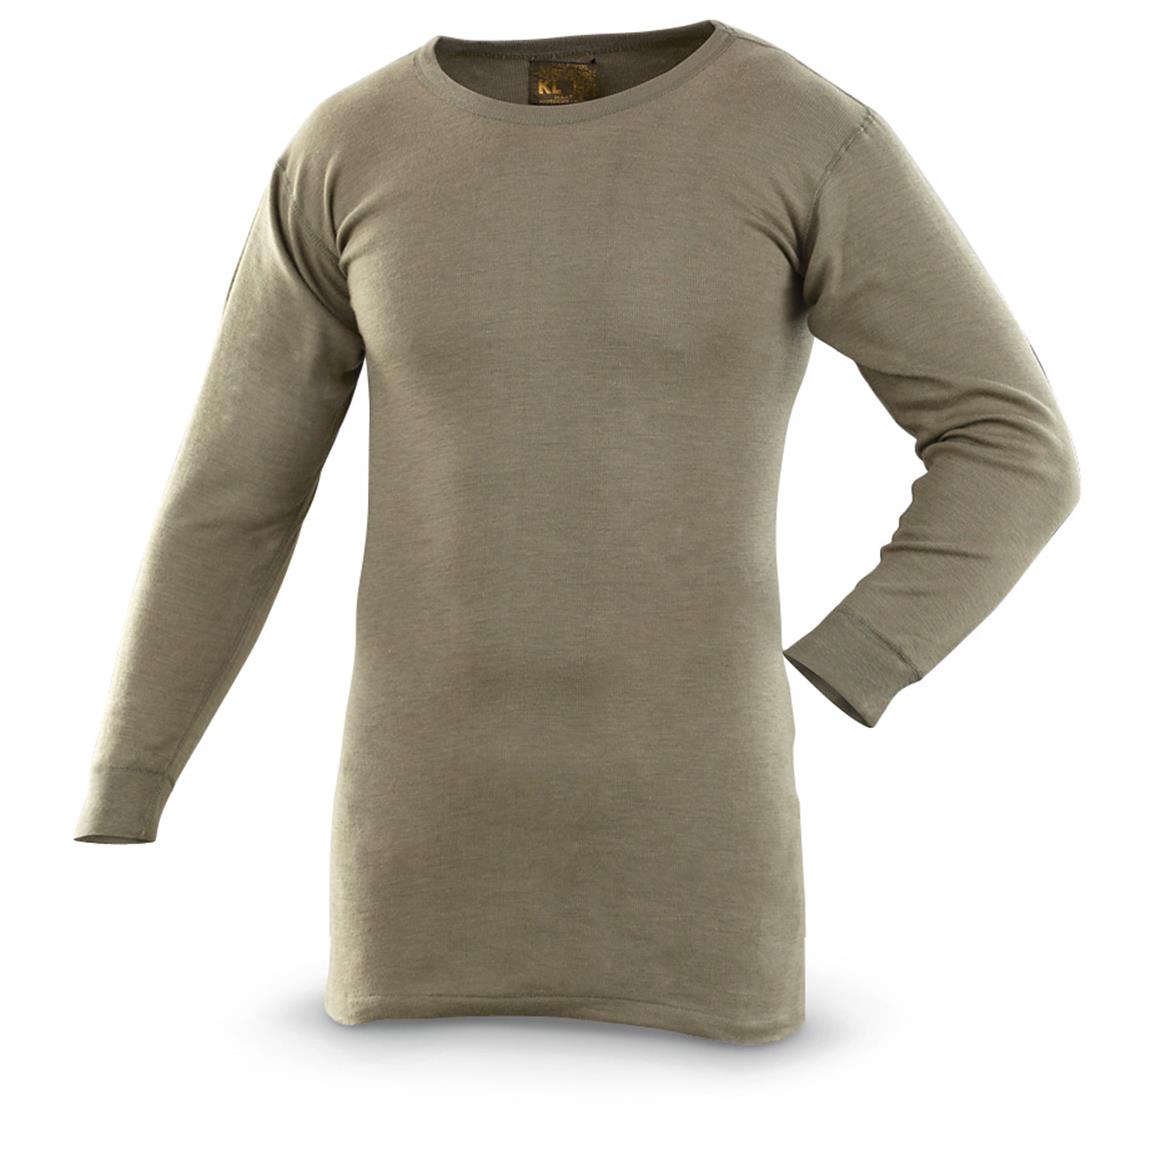 2 New Dutch Military Surplus Wool Long Sleeved Shirts 589435 Military And Tactical Shirts At